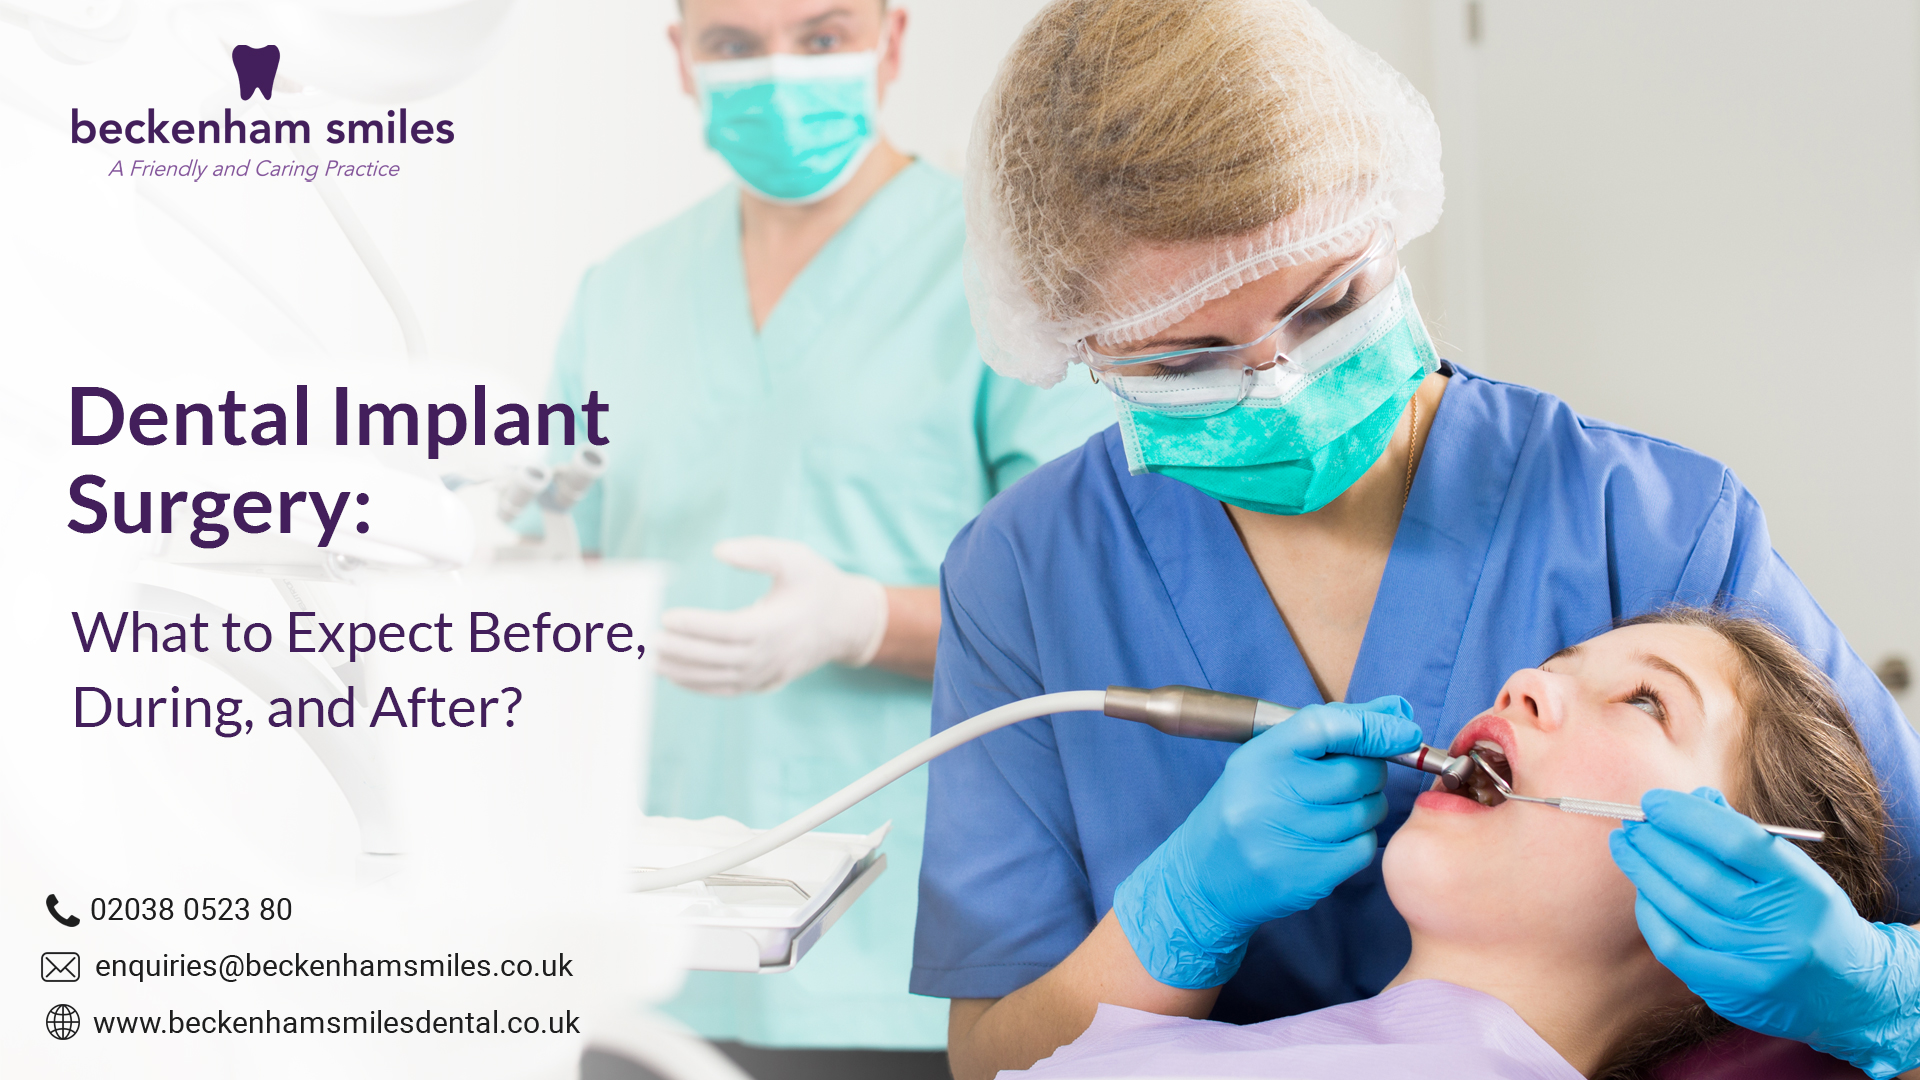 Dental Implant Surgery: What to Expect Before, During, and After?